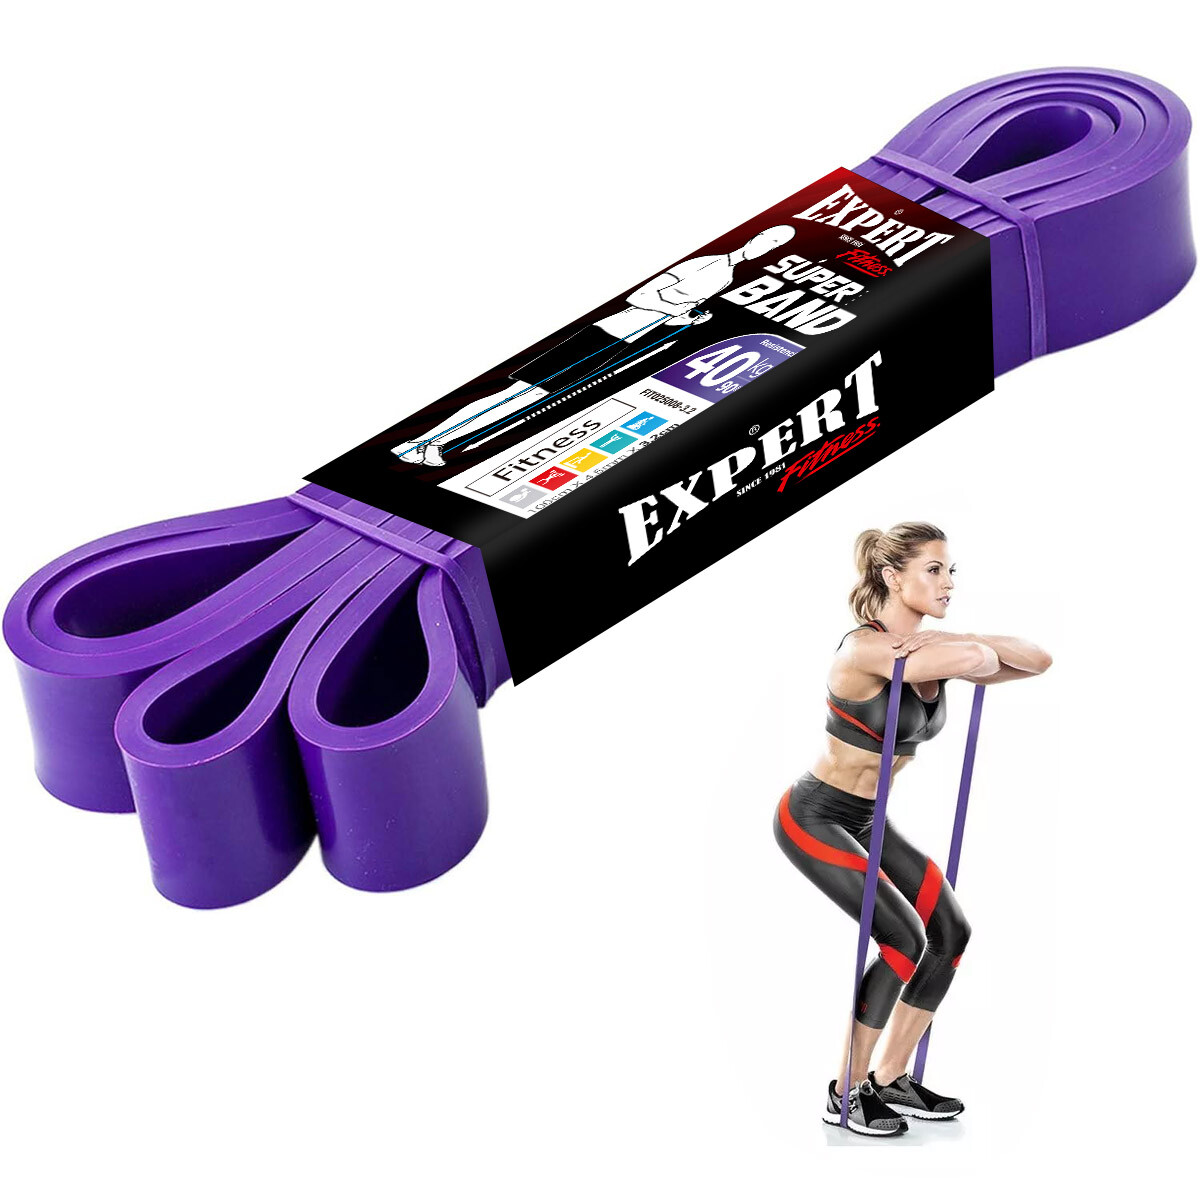 Super Band Profesional 32mm Entrenamiento Fitness Gym 